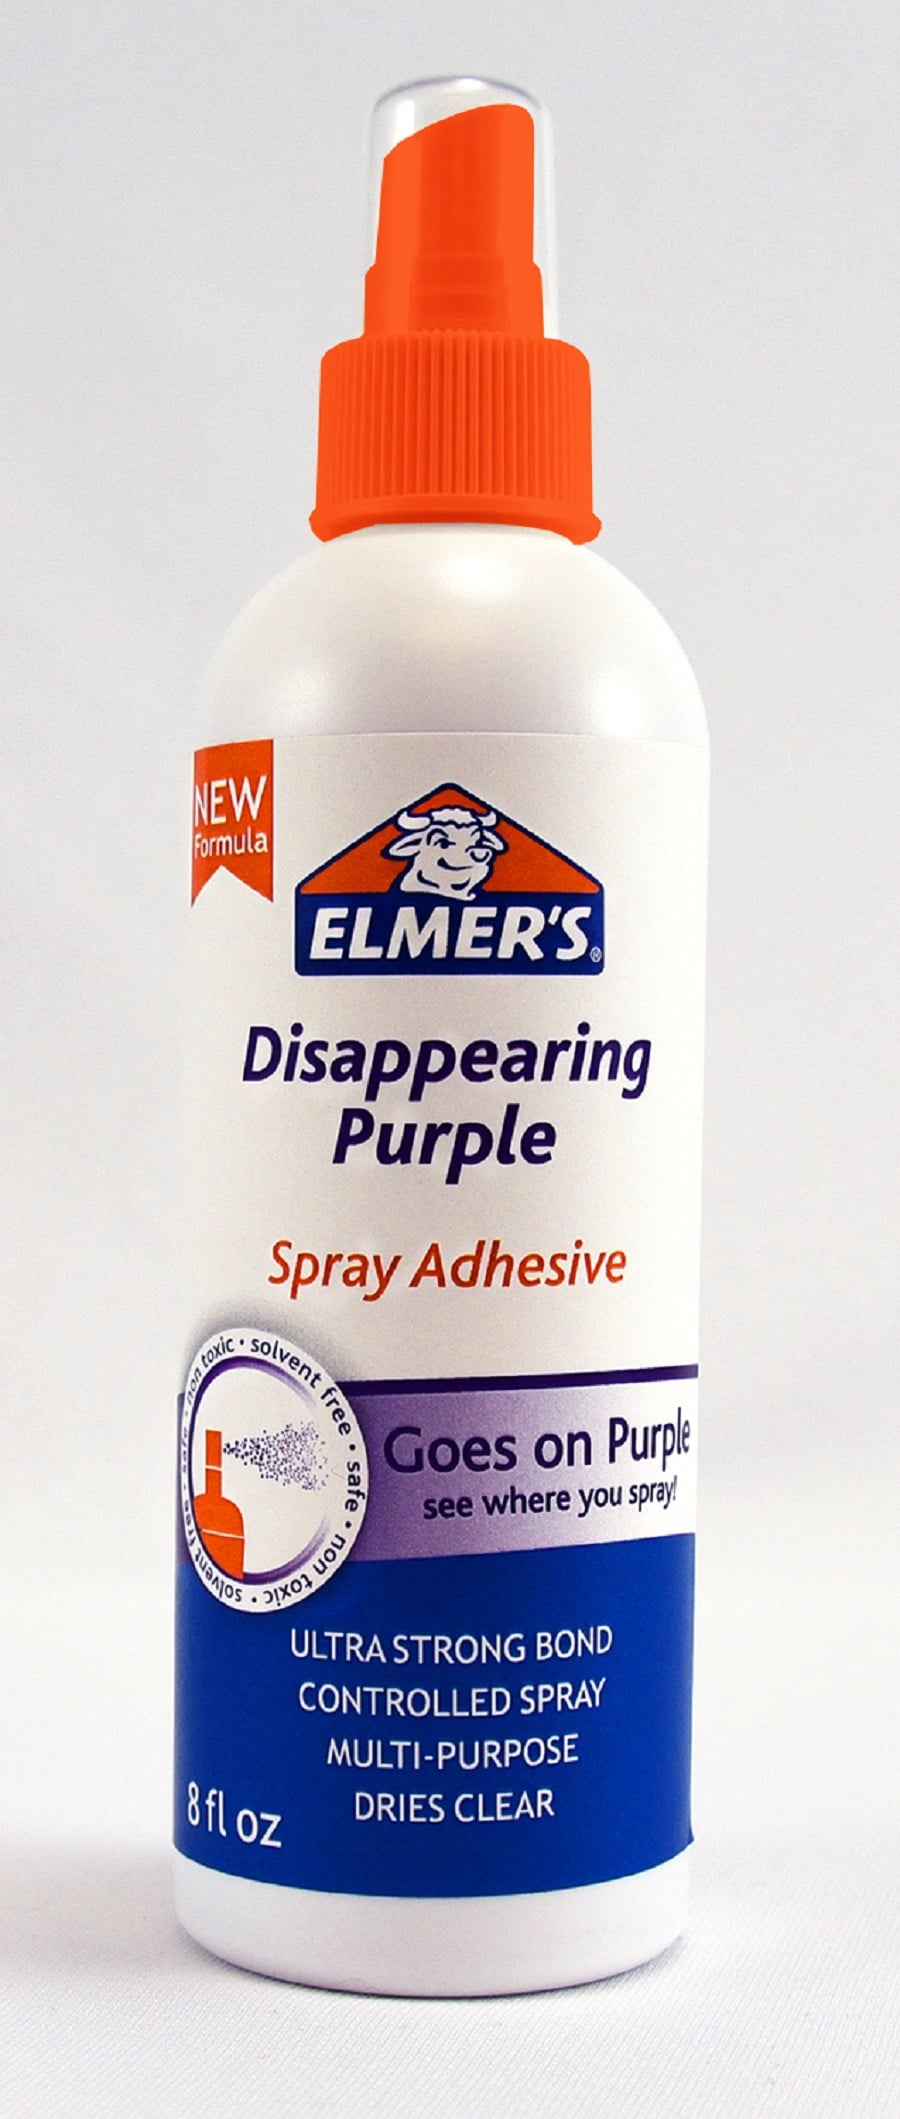 ELMER'S Disappearing Purple 8-oz Spray Adhesive at